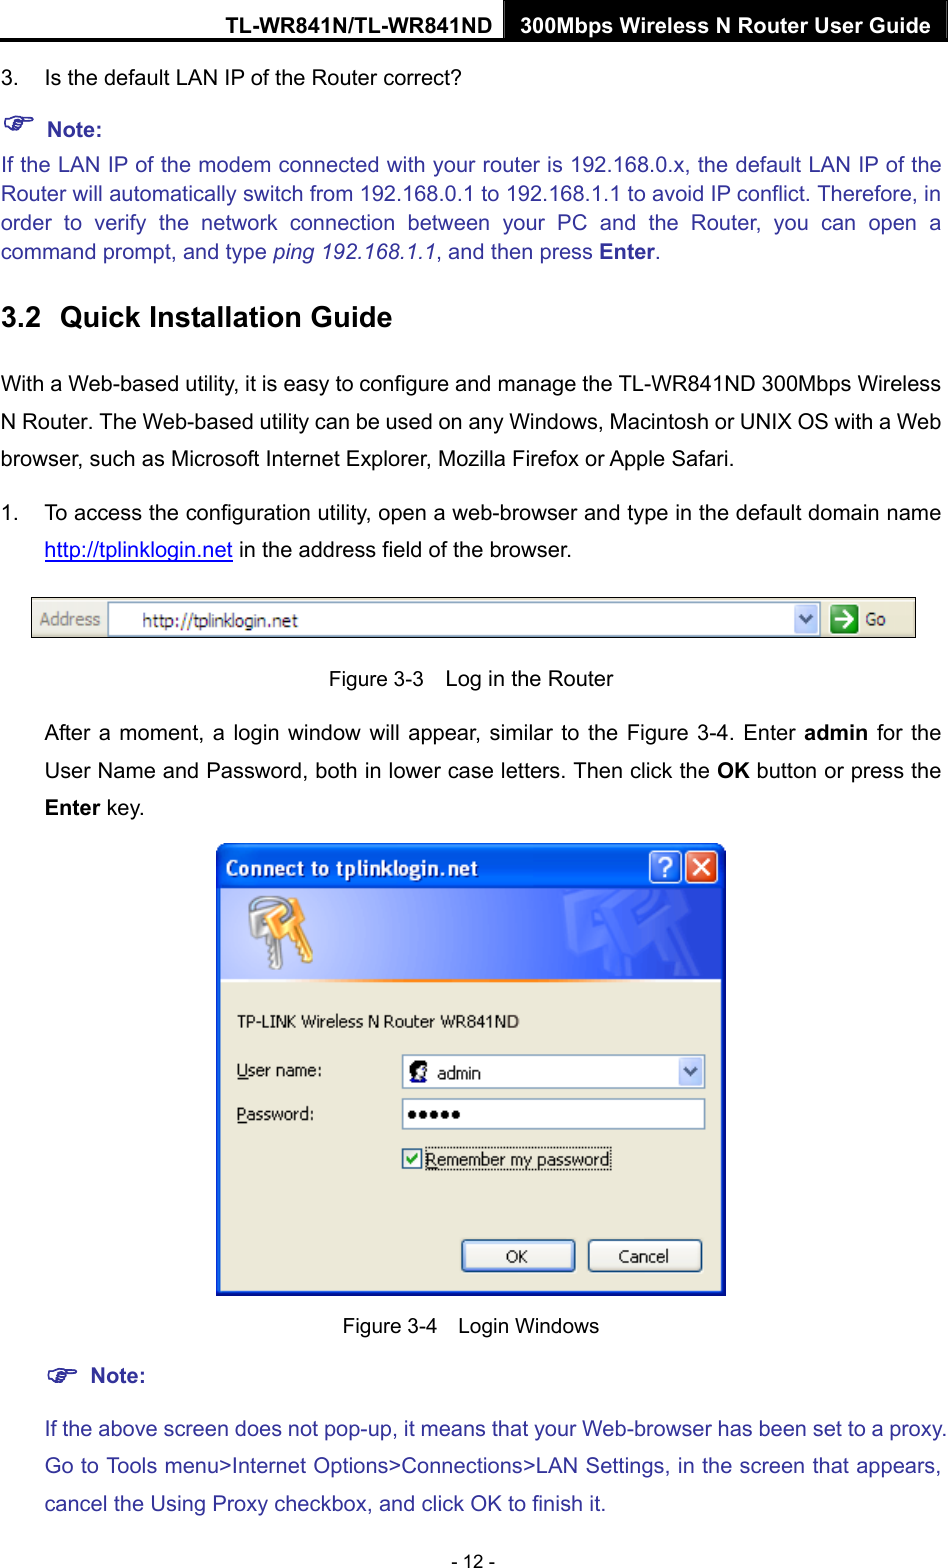 TL-WR841N/TL-WR841ND 300Mbps Wireless N Router User Guide - 12 - 3.  Is the default LAN IP of the Router correct? ) Note:  If the LAN IP of the modem connected with your router is 192.168.0.x, the default LAN IP of the Router will automatically switch from 192.168.0.1 to 192.168.1.1 to avoid IP conflict. Therefore, in order to verify the network connection between your PC and the Router, you can open a command prompt, and type ping 192.168.1.1, and then press Enter. 3.2  Quick Installation Guide With a Web-based utility, it is easy to configure and manage the TL-WR841ND 300Mbps Wireless N Router. The Web-based utility can be used on any Windows, Macintosh or UNIX OS with a Web browser, such as Microsoft Internet Explorer, Mozilla Firefox or Apple Safari. 1.  To access the configuration utility, open a web-browser and type in the default domain name http://tplinklogin.net in the address field of the browser.  Figure 3-3    Log in the Router After a moment, a login window will appear, similar to the Figure 3-4. Enter admin for the User Name and Password, both in lower case letters. Then click the OK button or press the Enter key.  Figure 3-4  Login Windows ) Note: If the above screen does not pop-up, it means that your Web-browser has been set to a proxy. Go to Tools menu&gt;Internet Options&gt;Connections&gt;LAN Settings, in the screen that appears, cancel the Using Proxy checkbox, and click OK to finish it. 